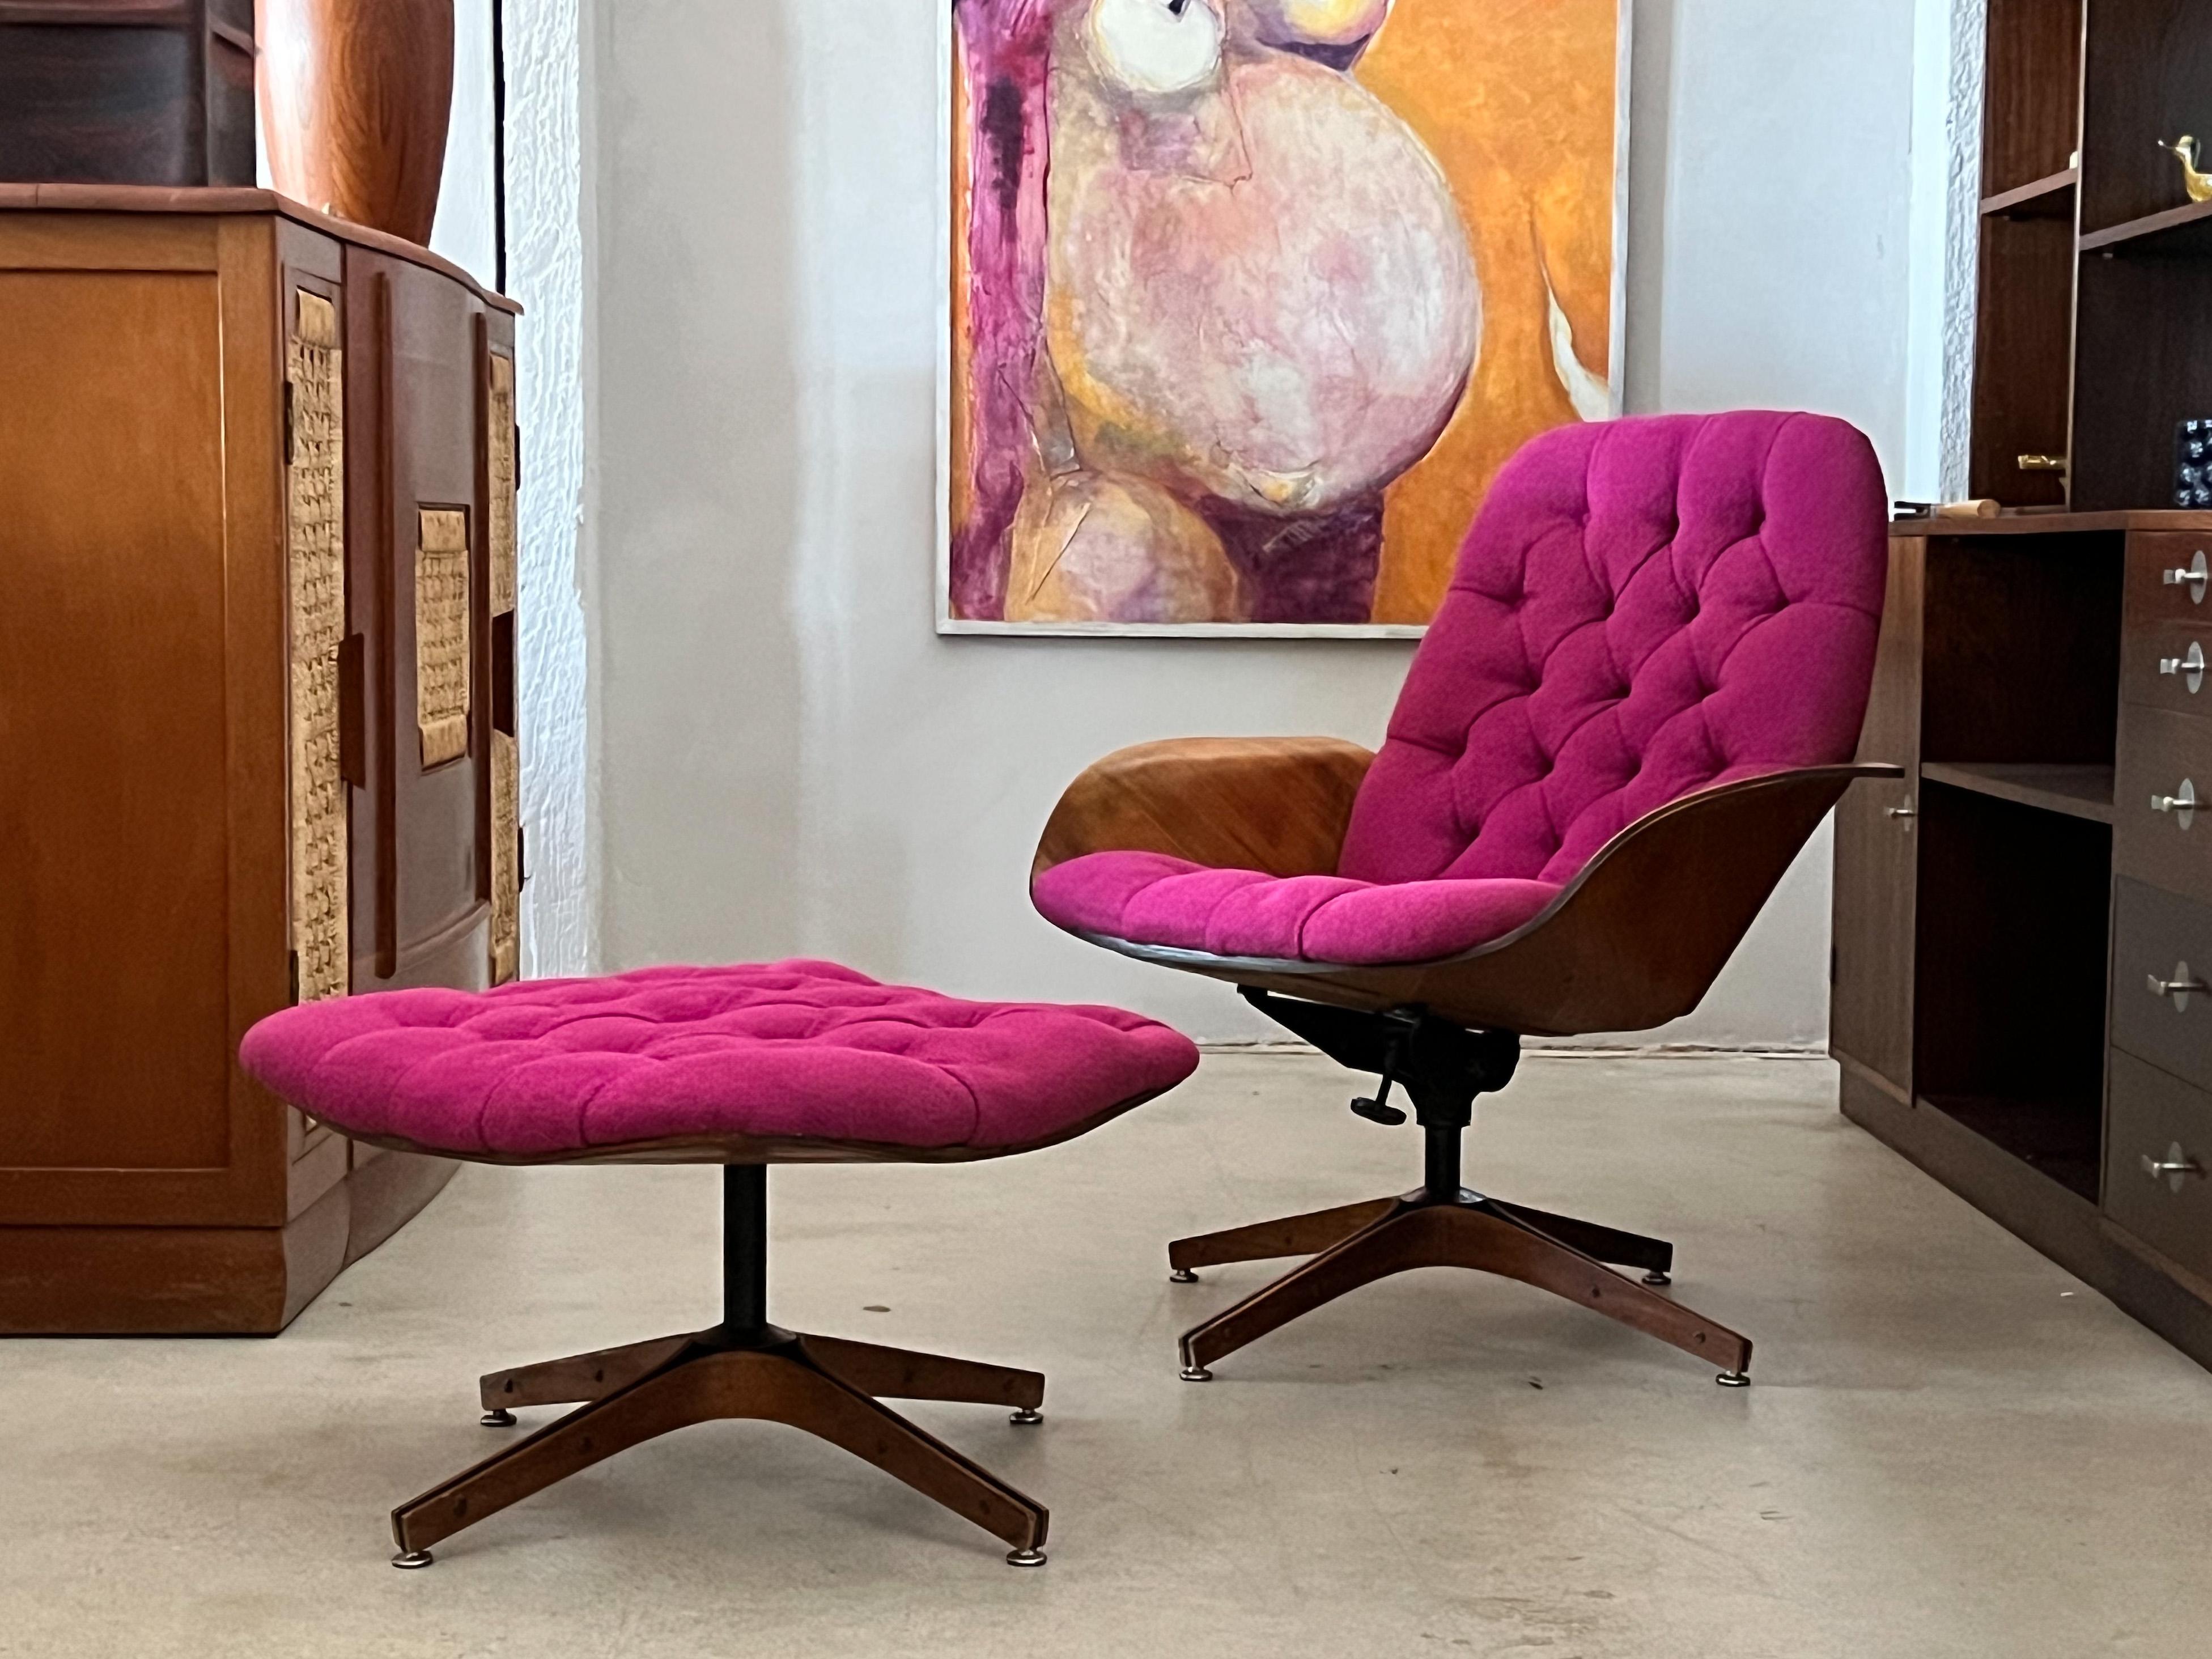 Swivel and tilt “Mrs. Chair” and ottoman designed by George Mulhauser for Plycraft, c. 1960s. Constructed of a molded walnut ply shell and a wood wrapped base. This smaller scale variation was first mentioned in 1961 along side its counterpart, the